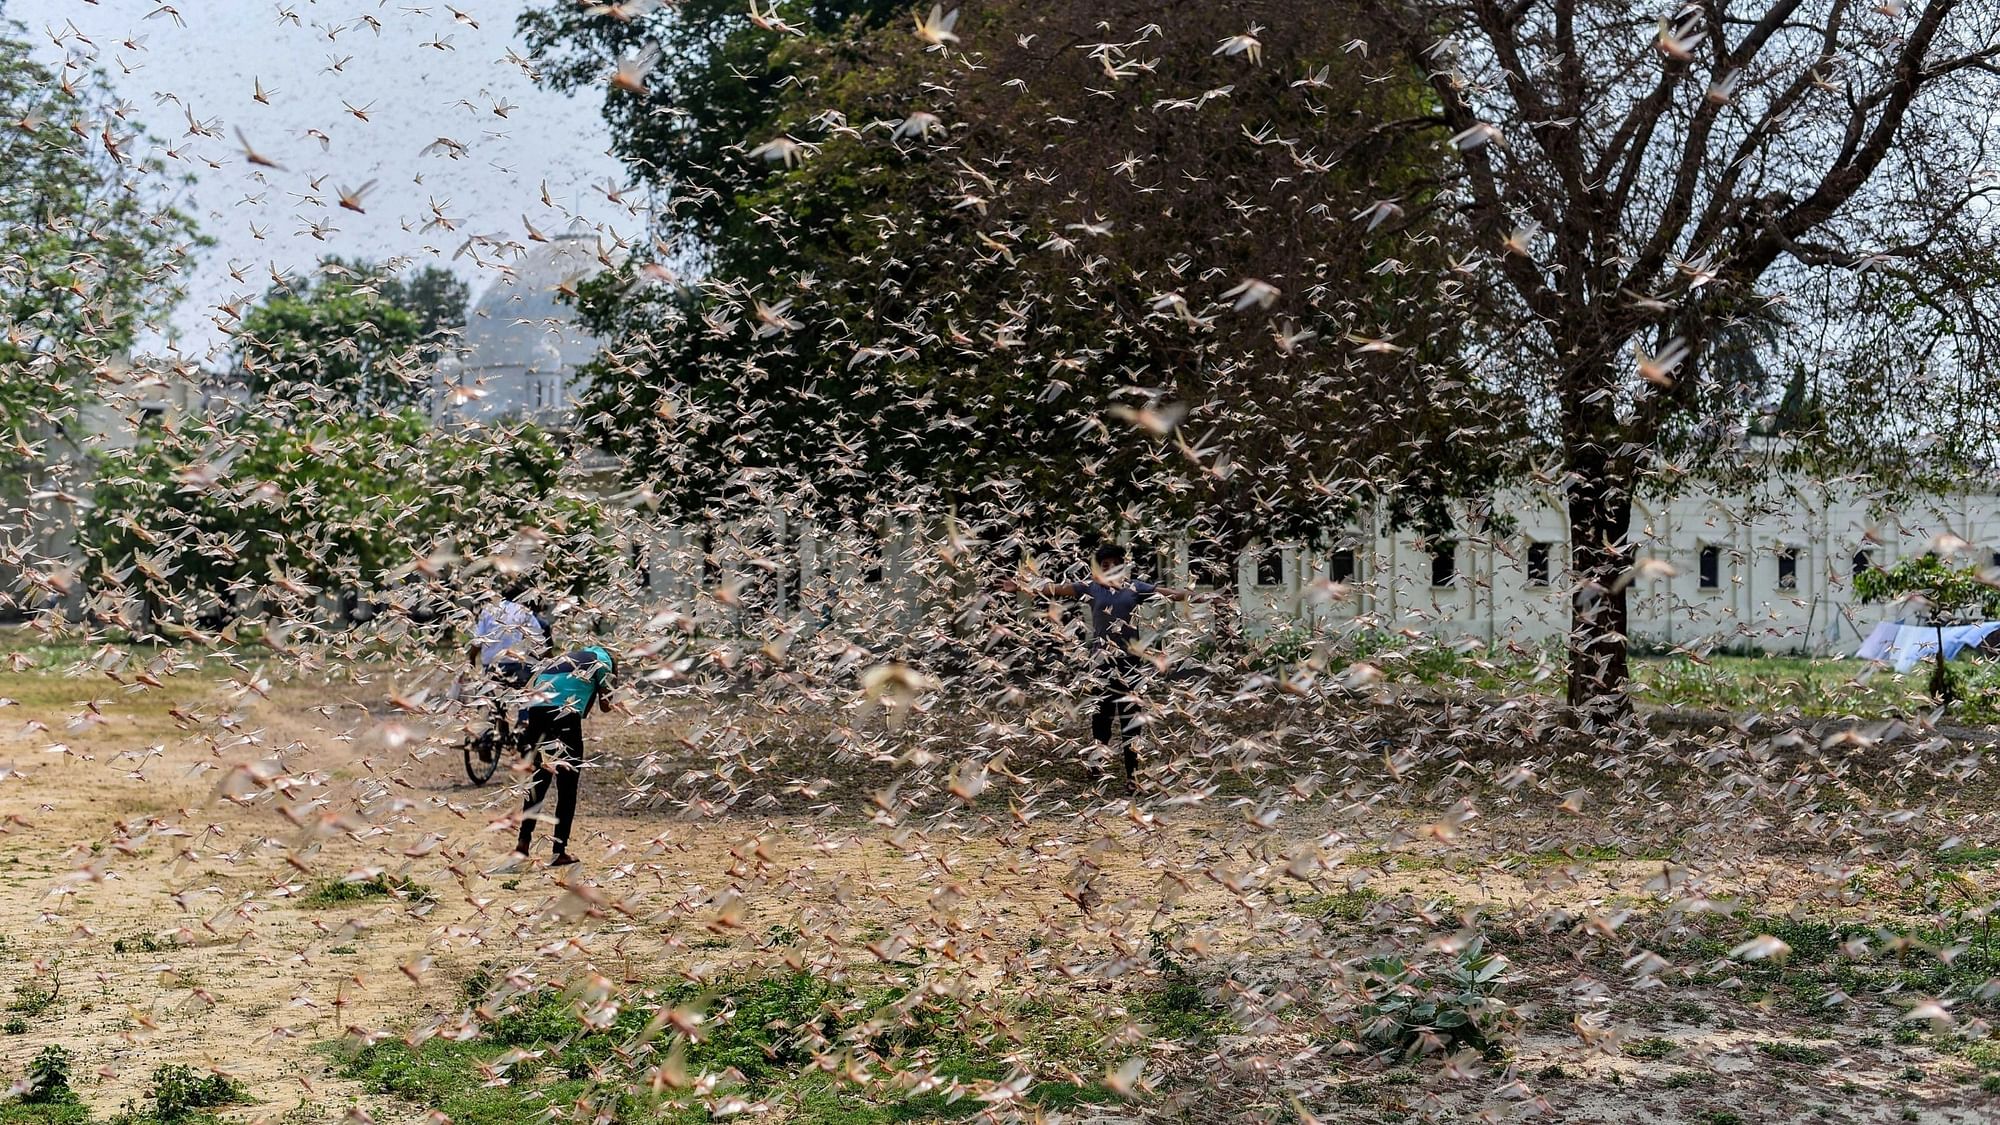 Children attempt to drive away a swarm of locusts flying over a field, in Prayagraj.